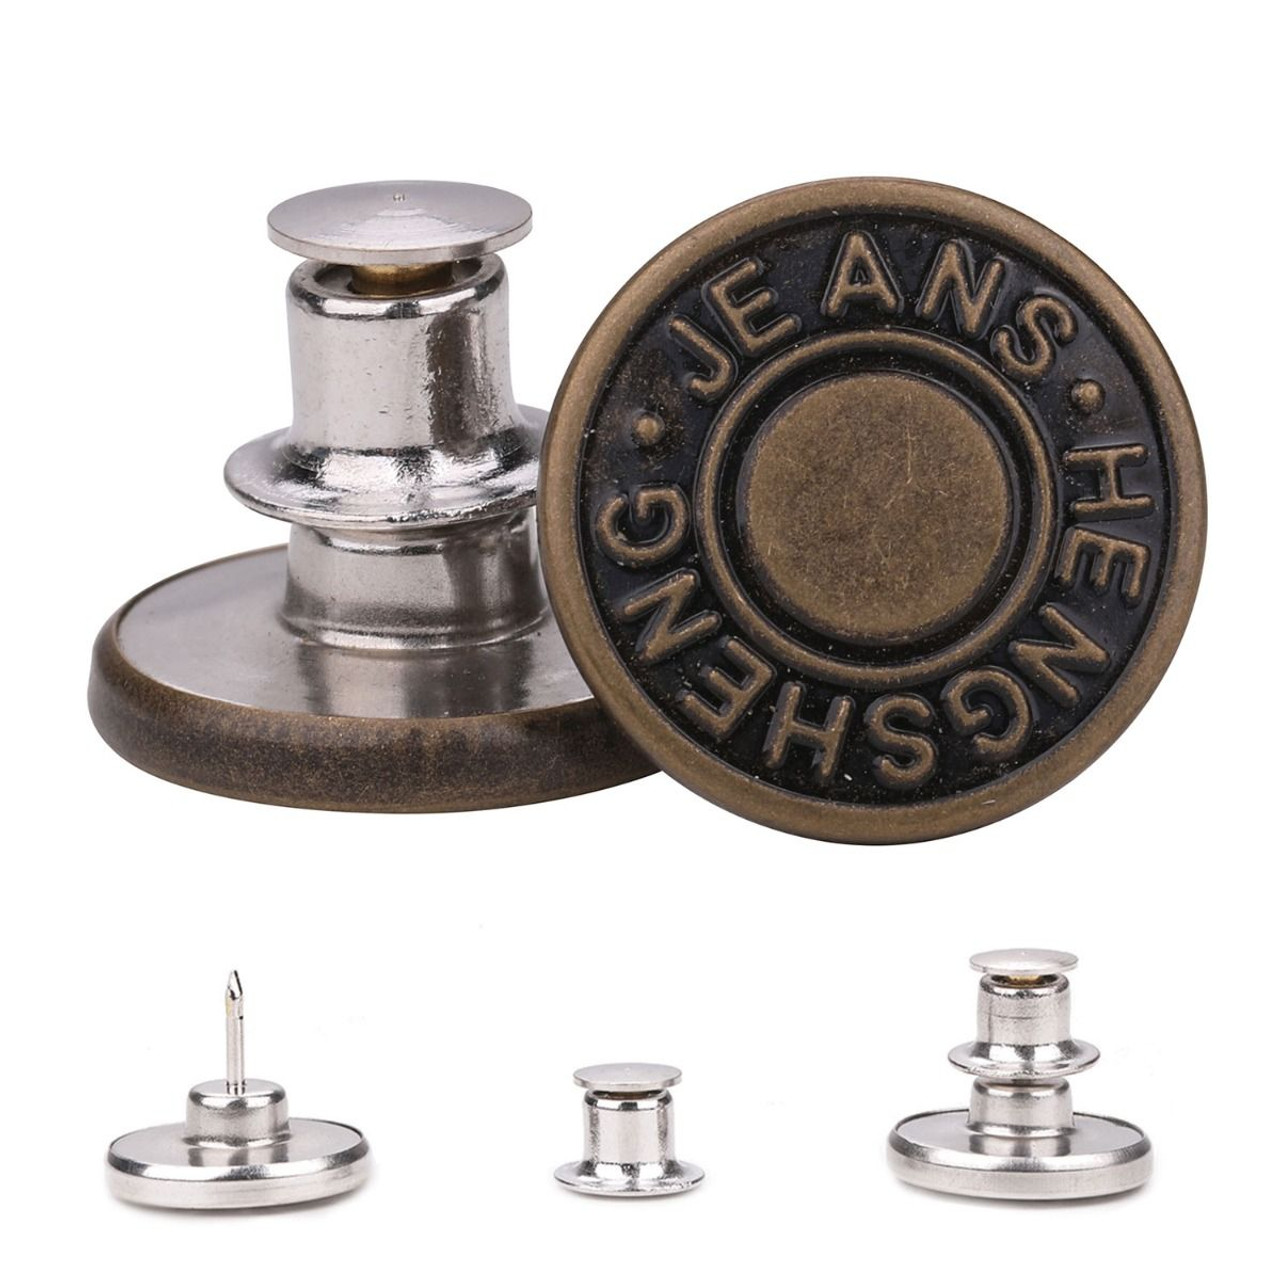 Screw together Jean Buttons, Stud Rivet NO-SEW 17mm Replacement